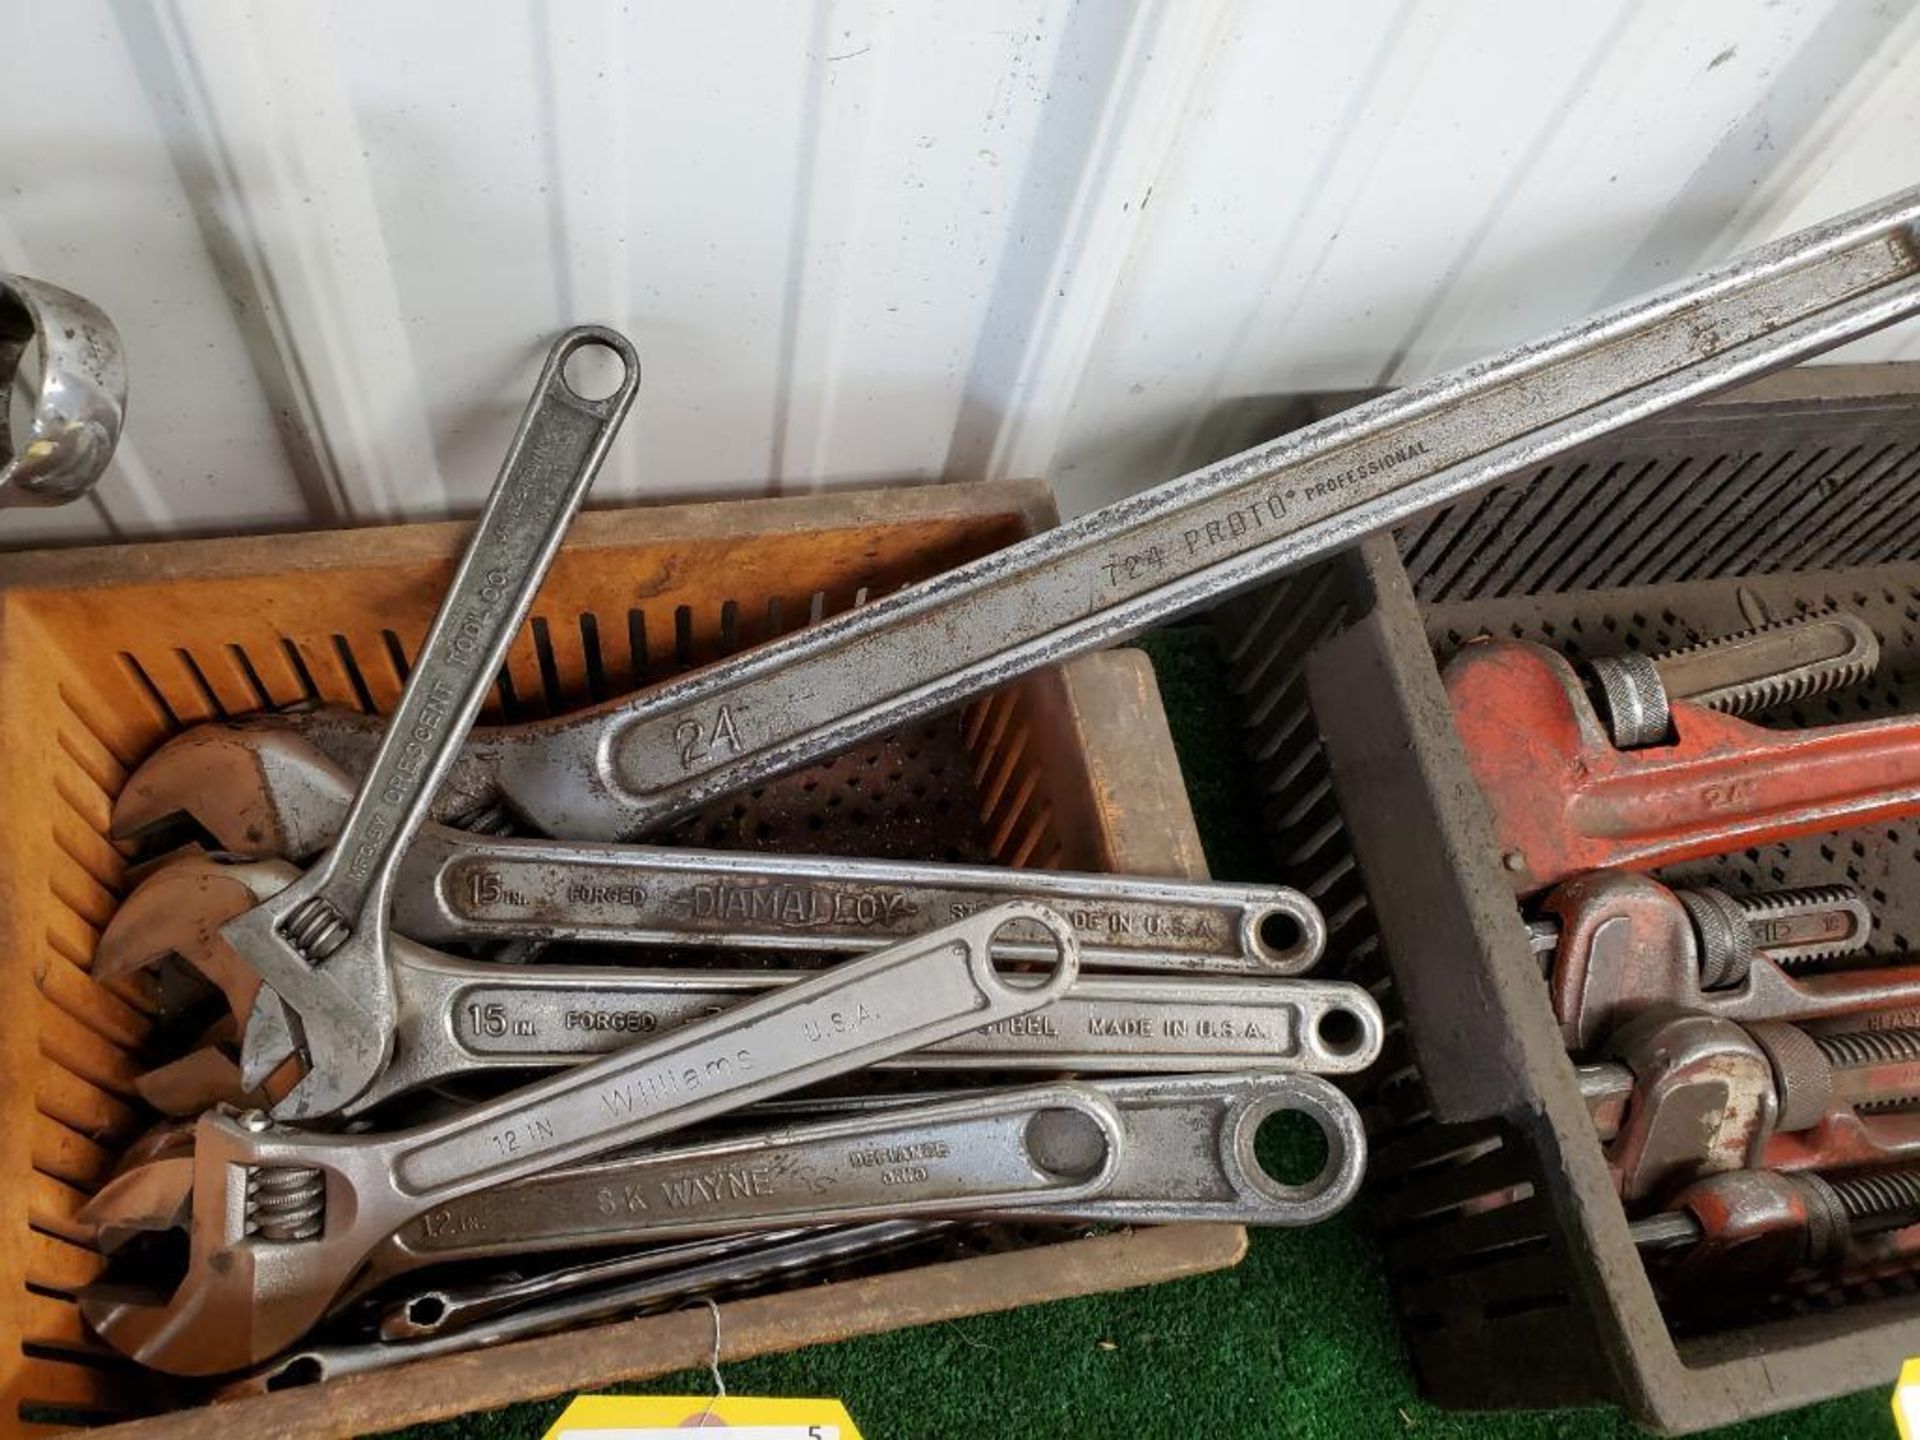 LOT OF CRESCENT WRENCHES UP TO 24"